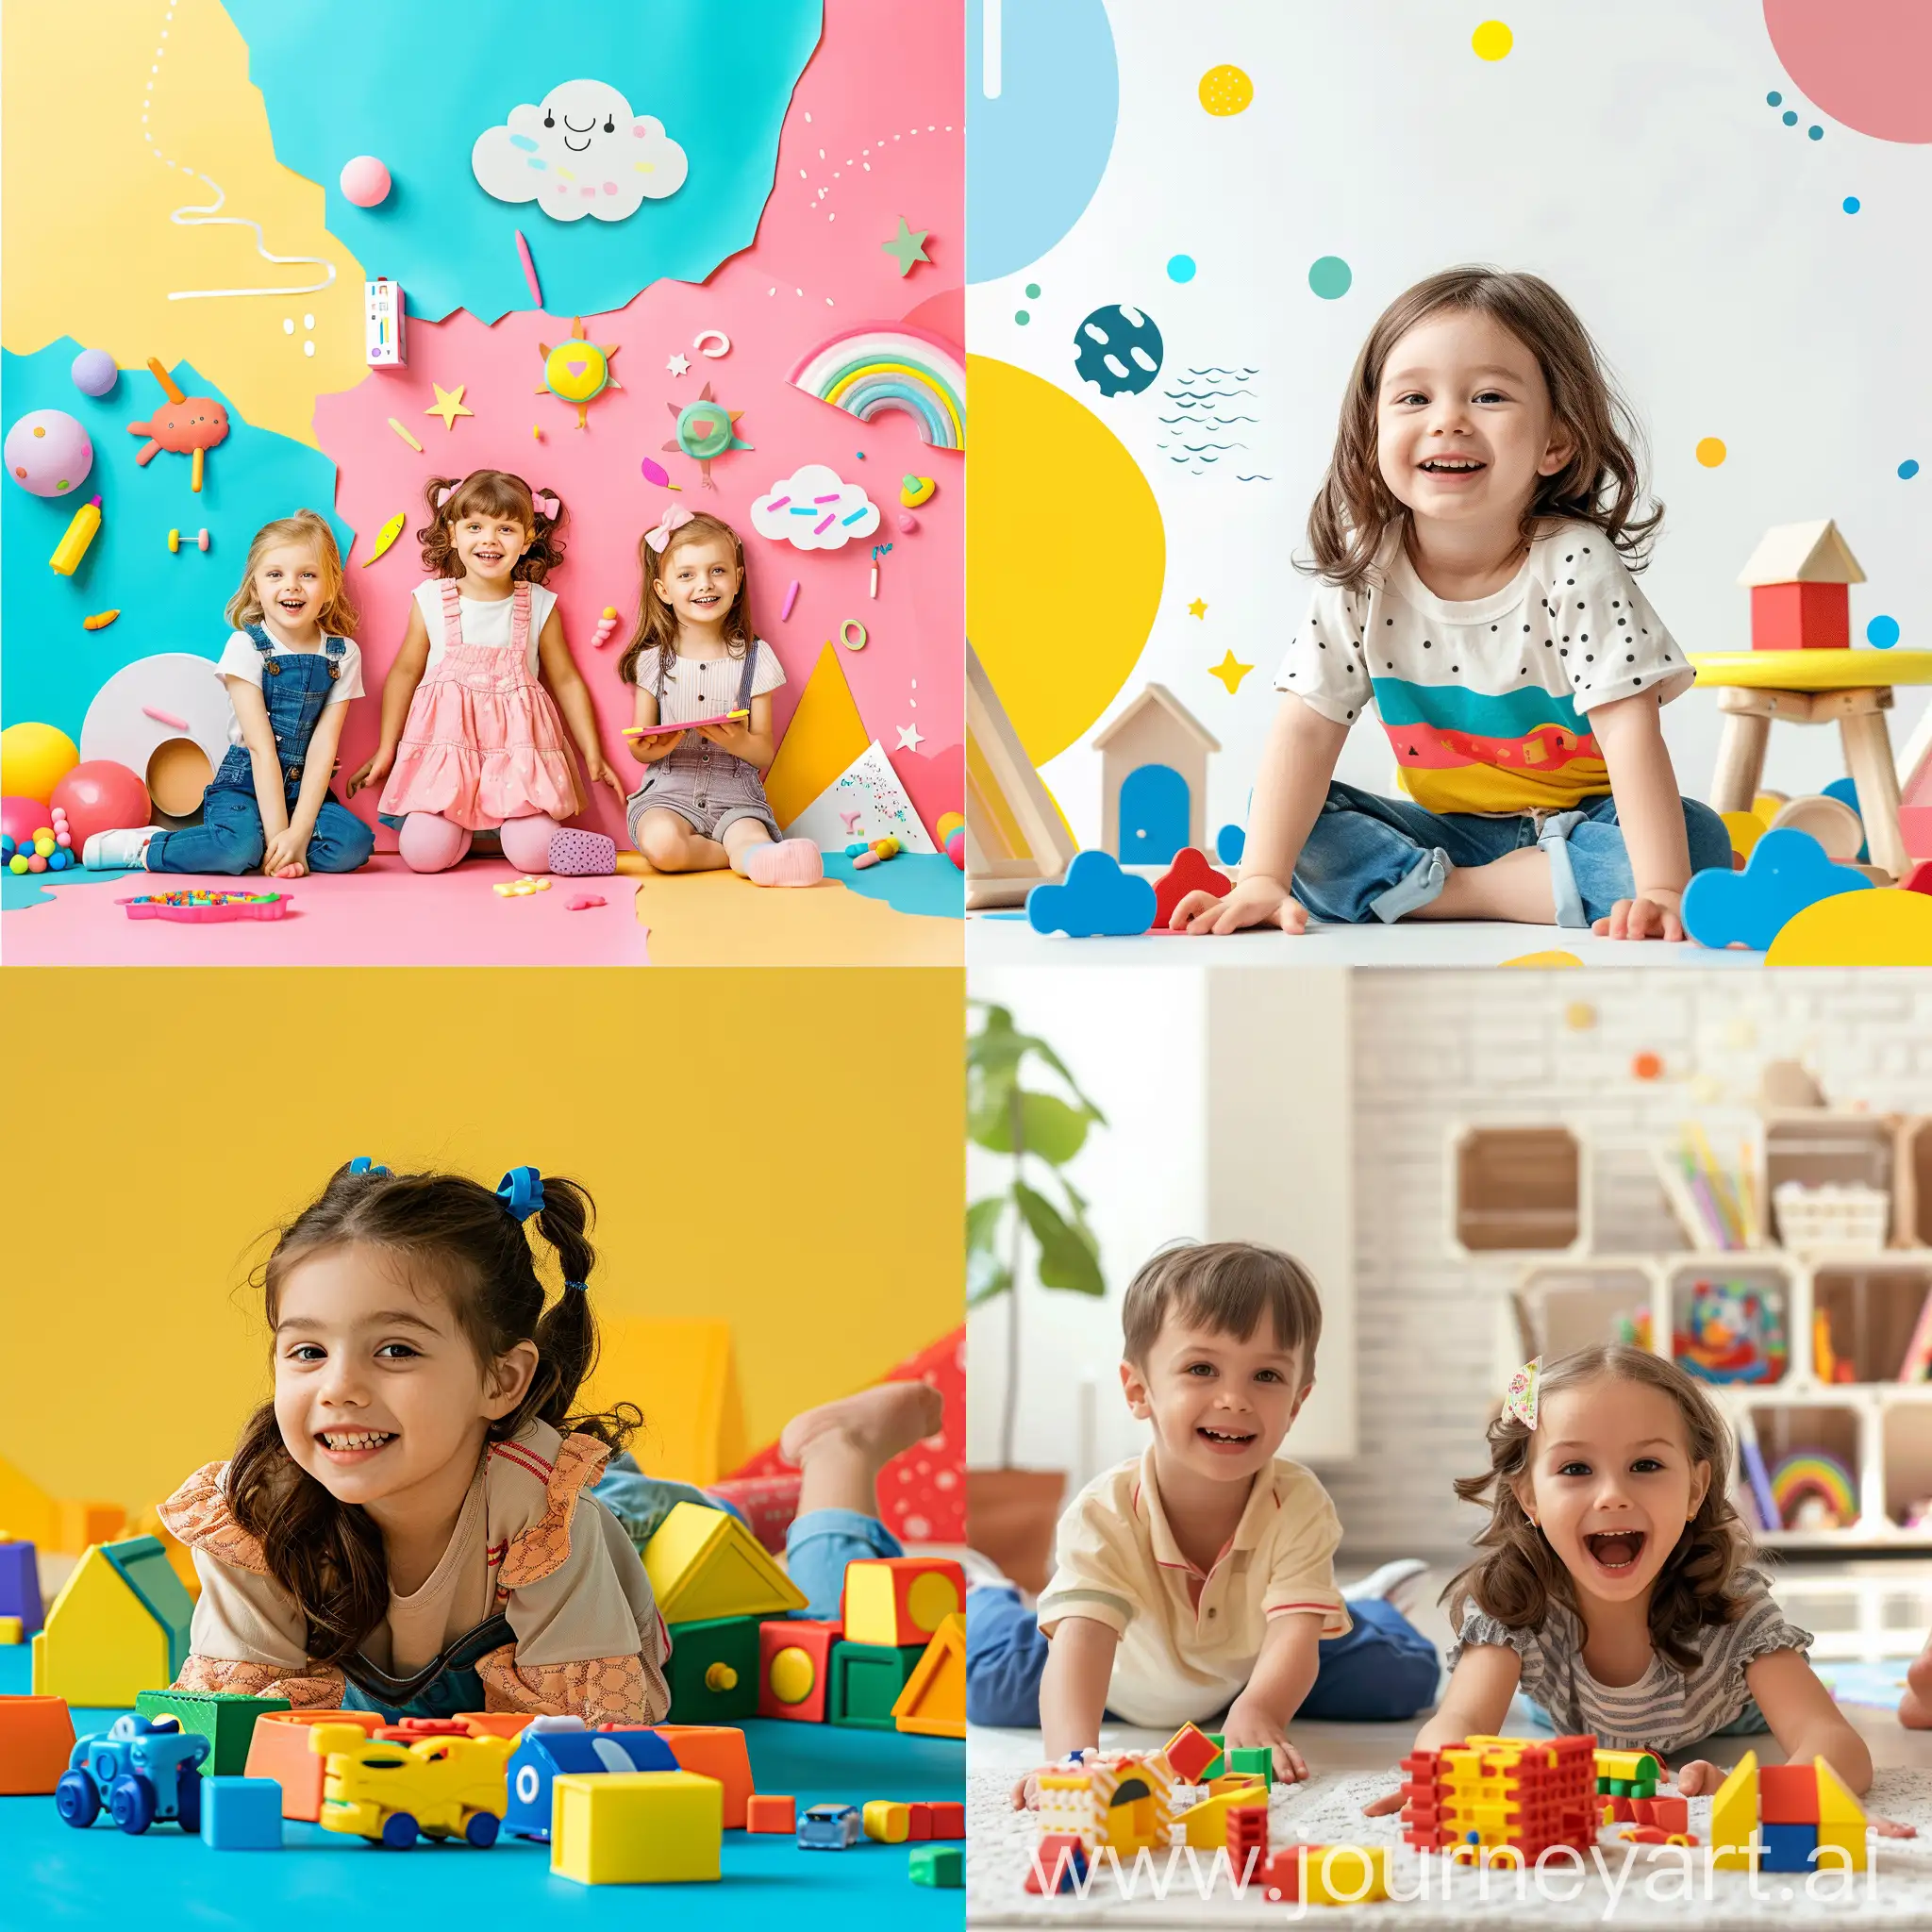 geneate a website banner for children products